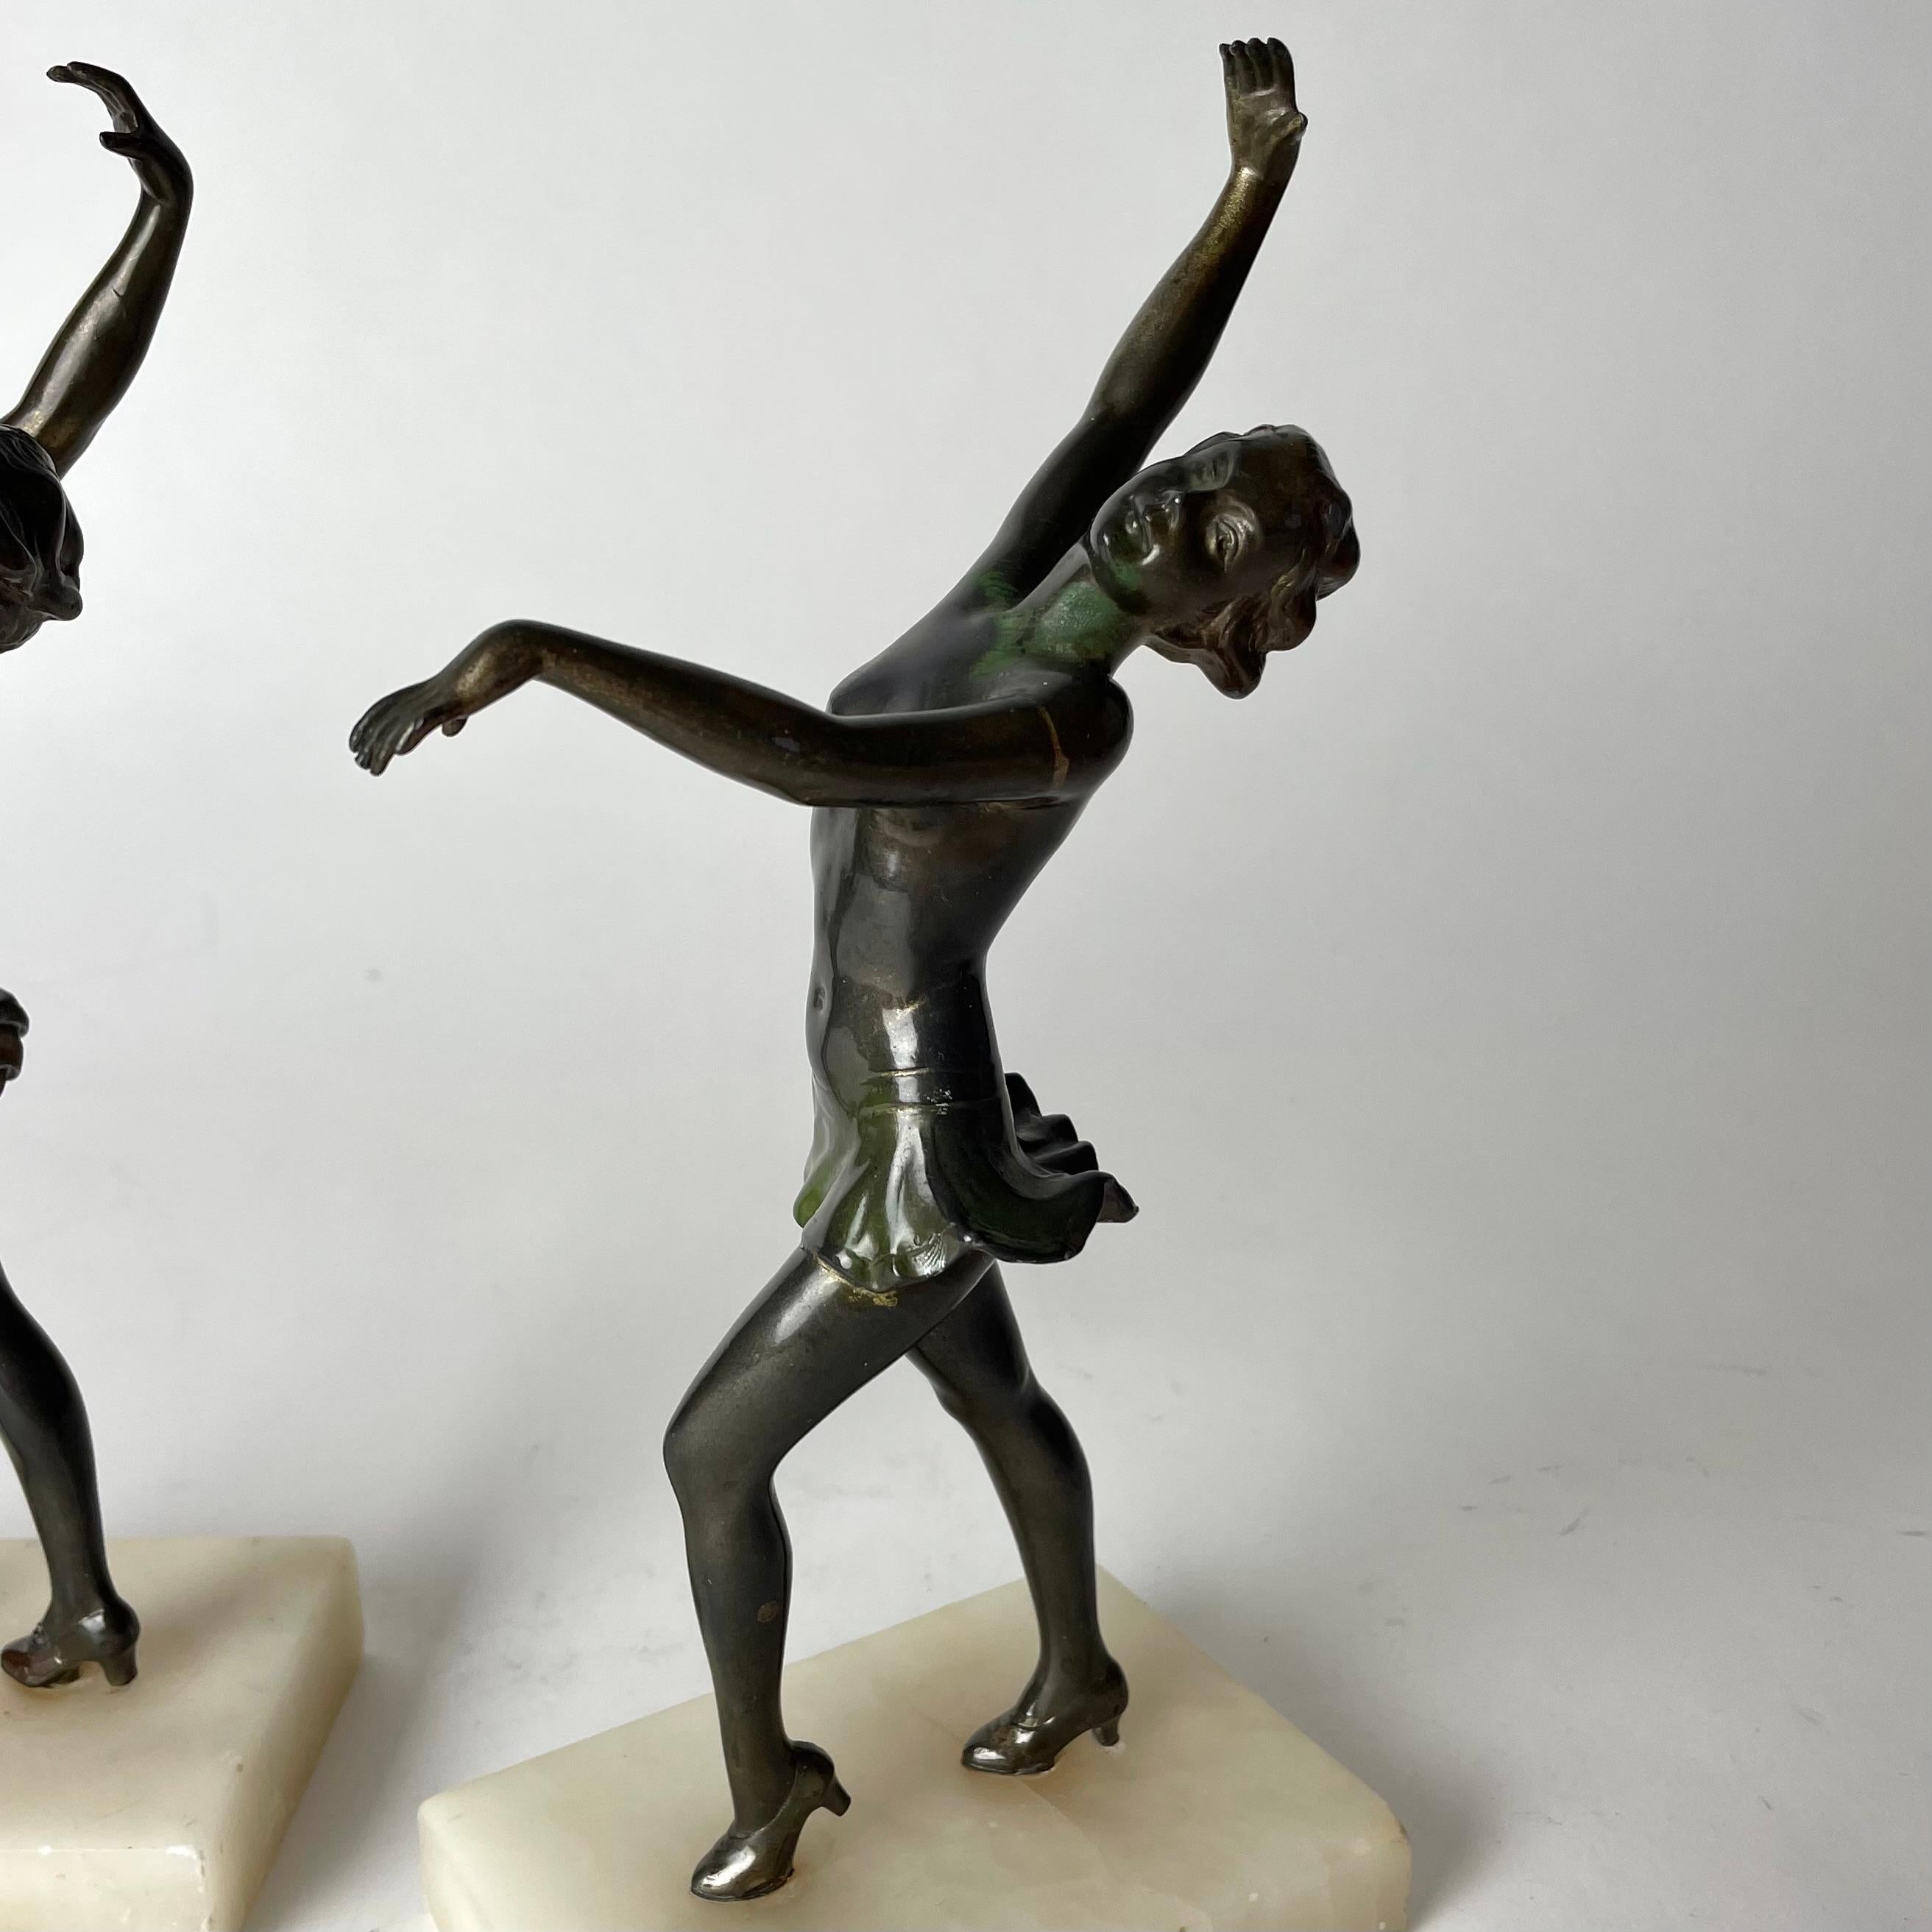 A pair of period Art Deco Bookends from 1920s-1930s with dancing women. 3